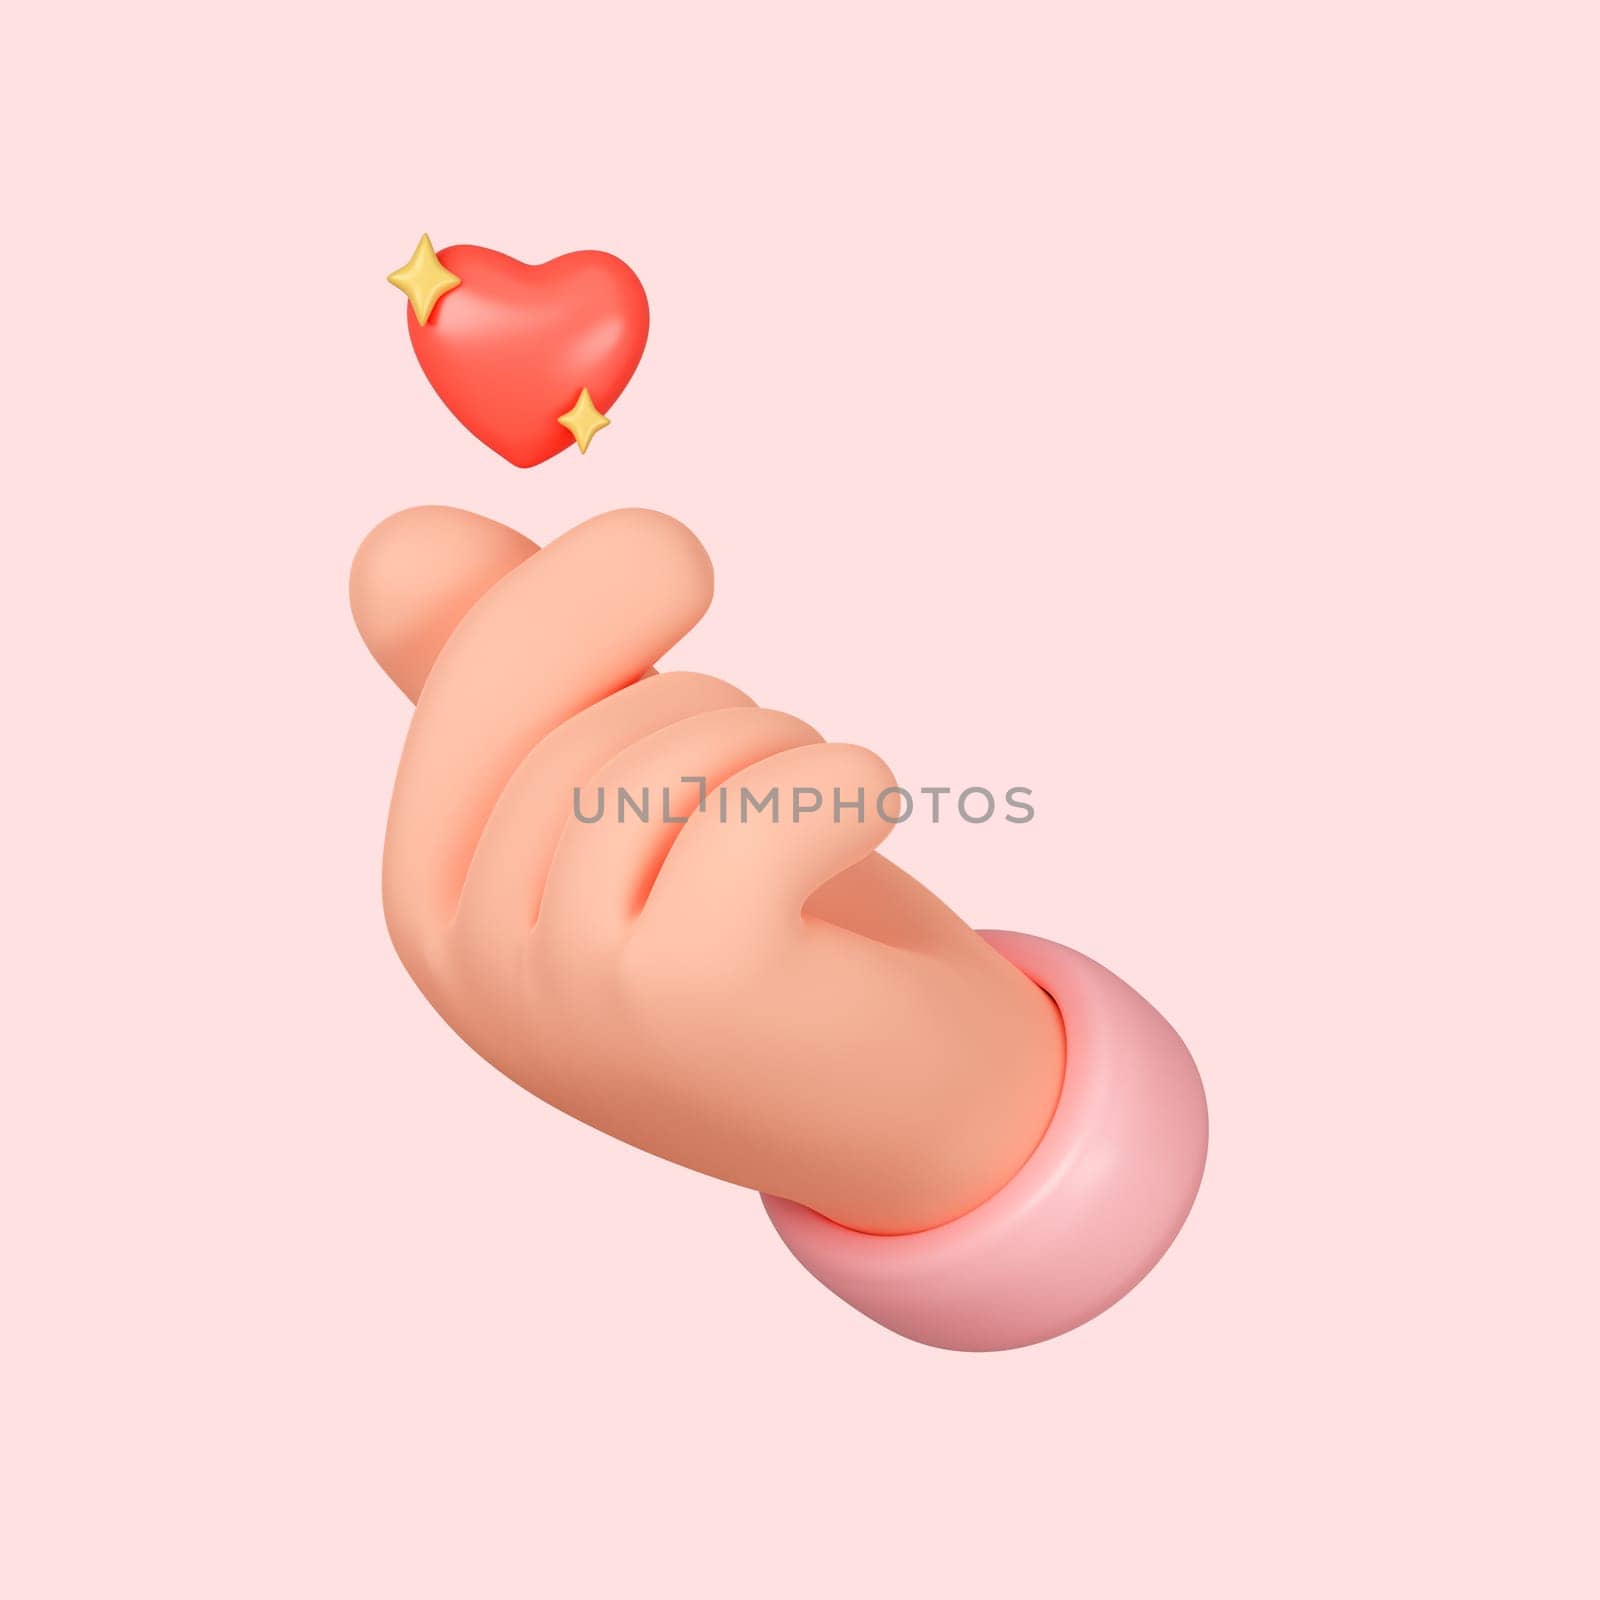 3d hands mini love gesture with red heart, korean kpop expression of love isolated on pink background with clipping path. 3d render illustration.